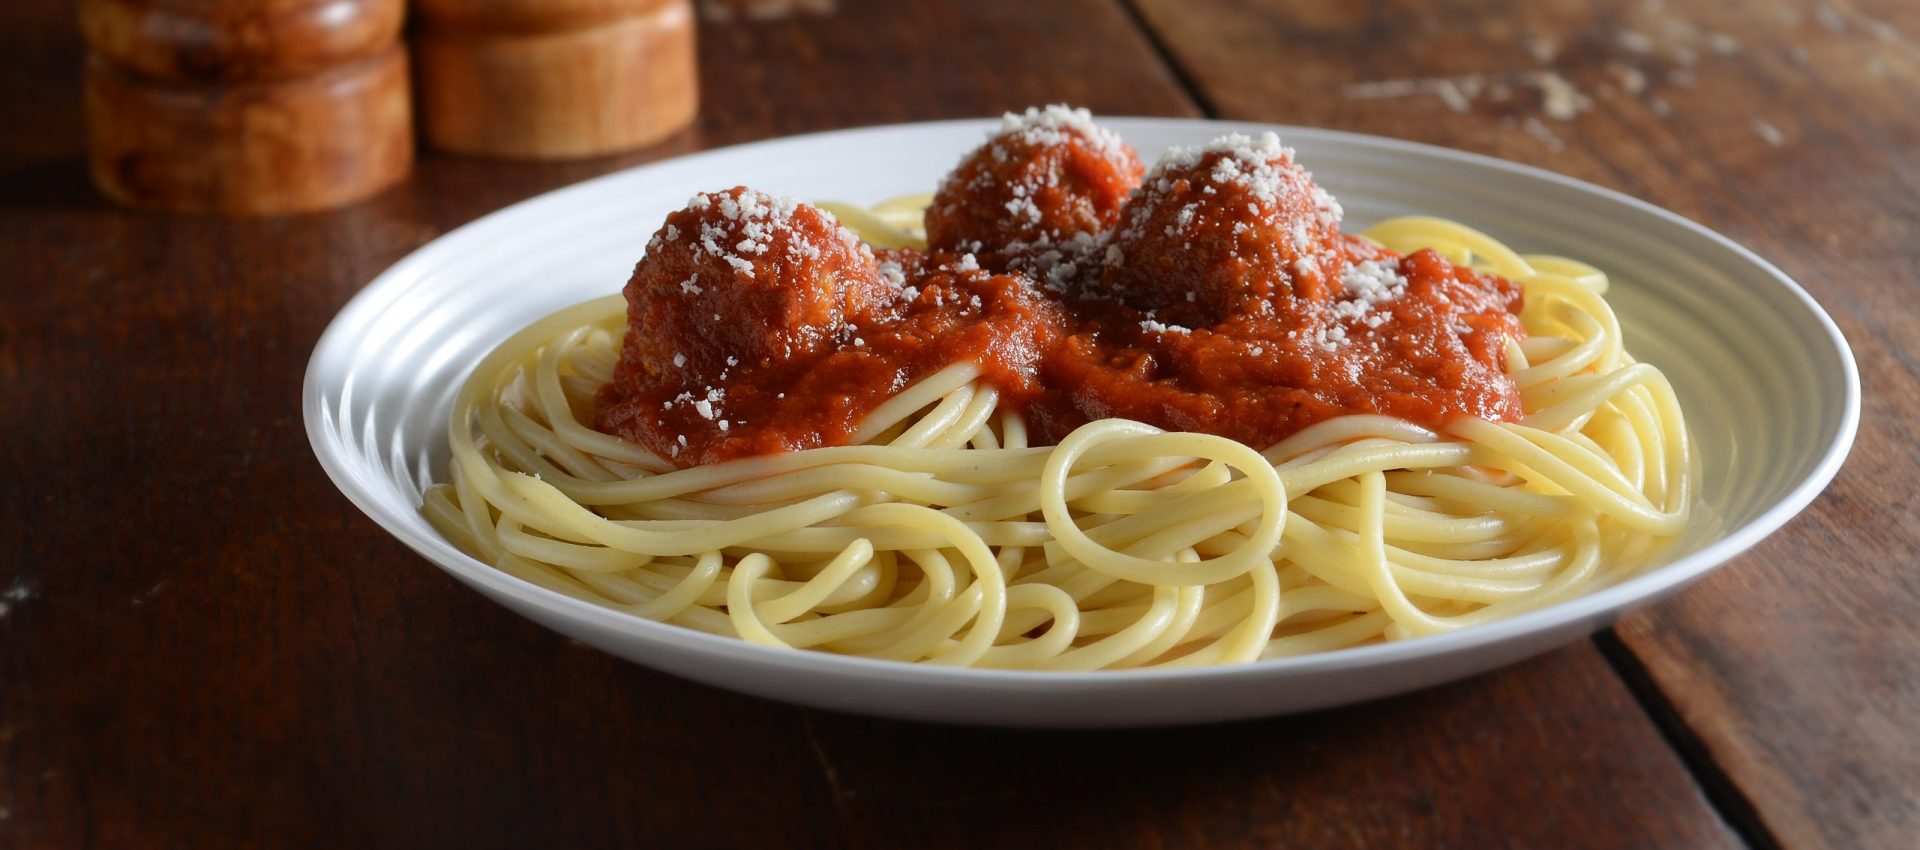 Vegetable-spaghetti-and-meatballs-1-HR-scaled-1920x850 Easy Weeknight Spaghetti and Meatballs